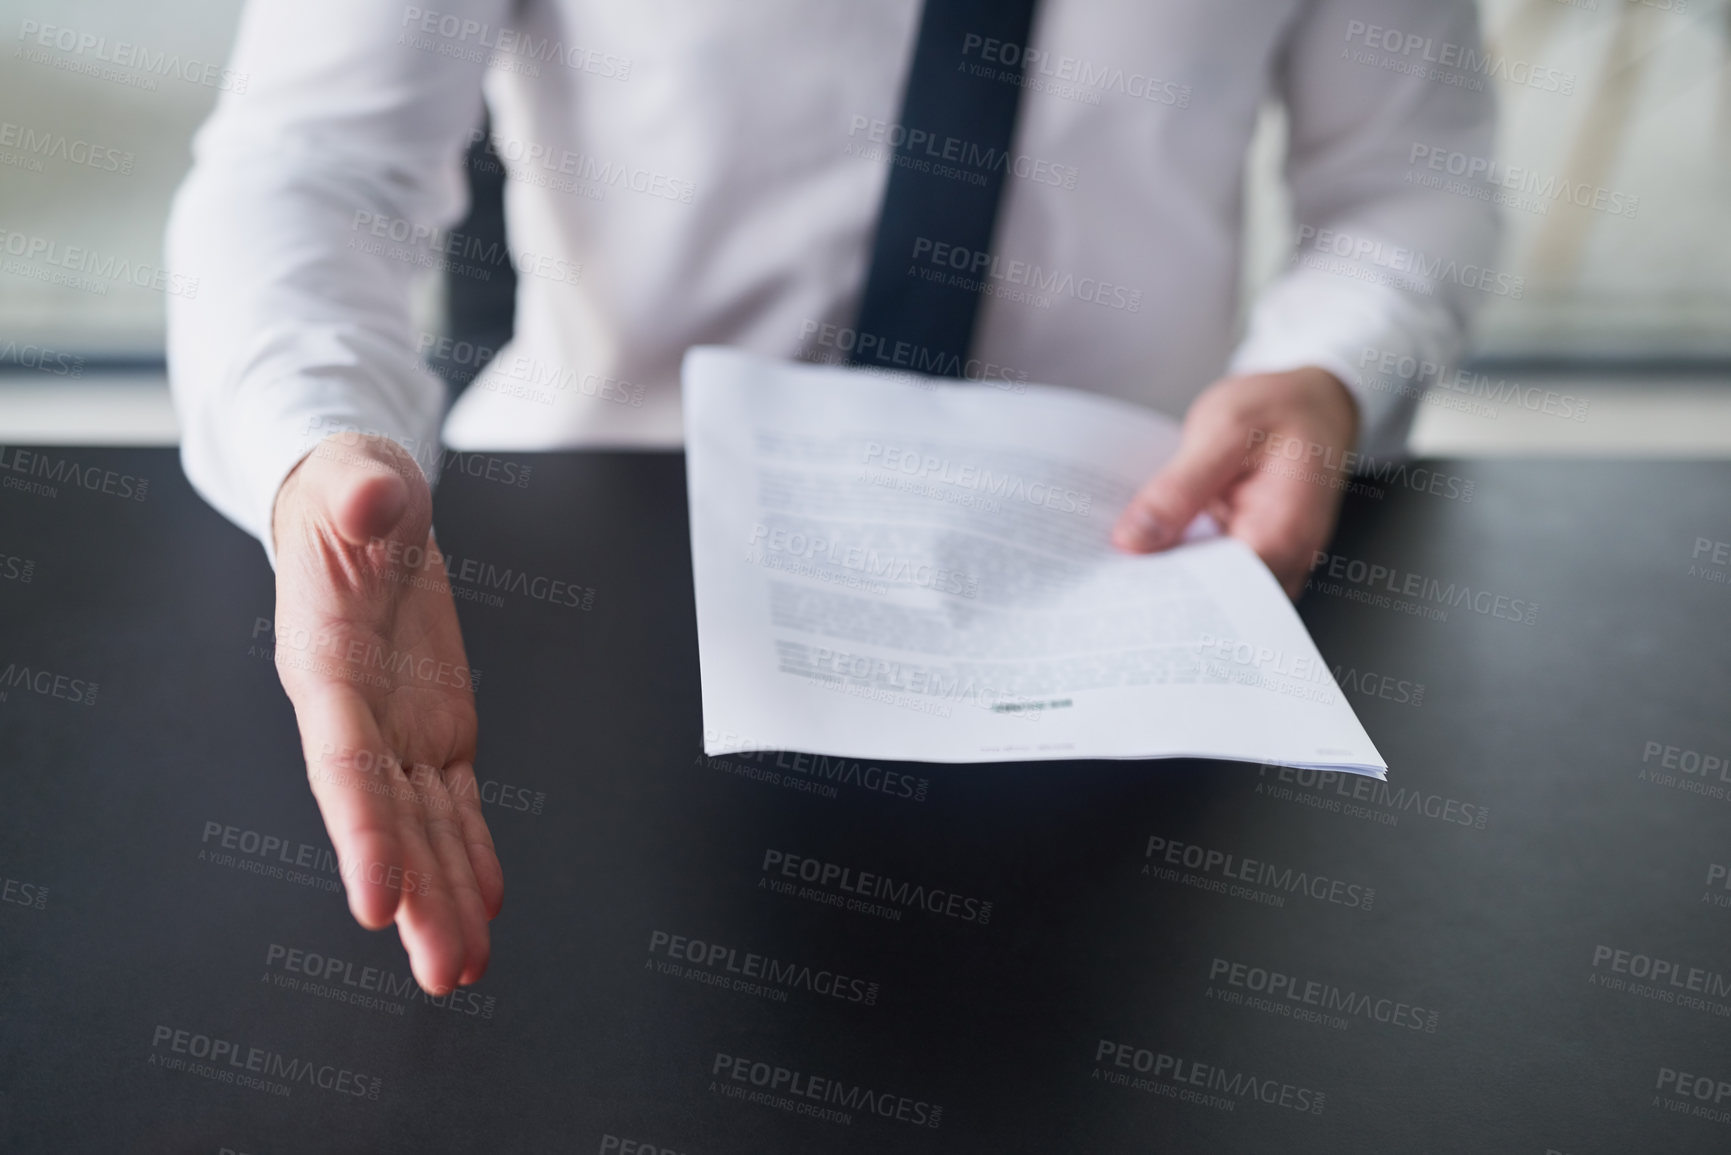 Buy stock photo Cropped shot of a businessman holding a resume and extending  his arm to shake hands